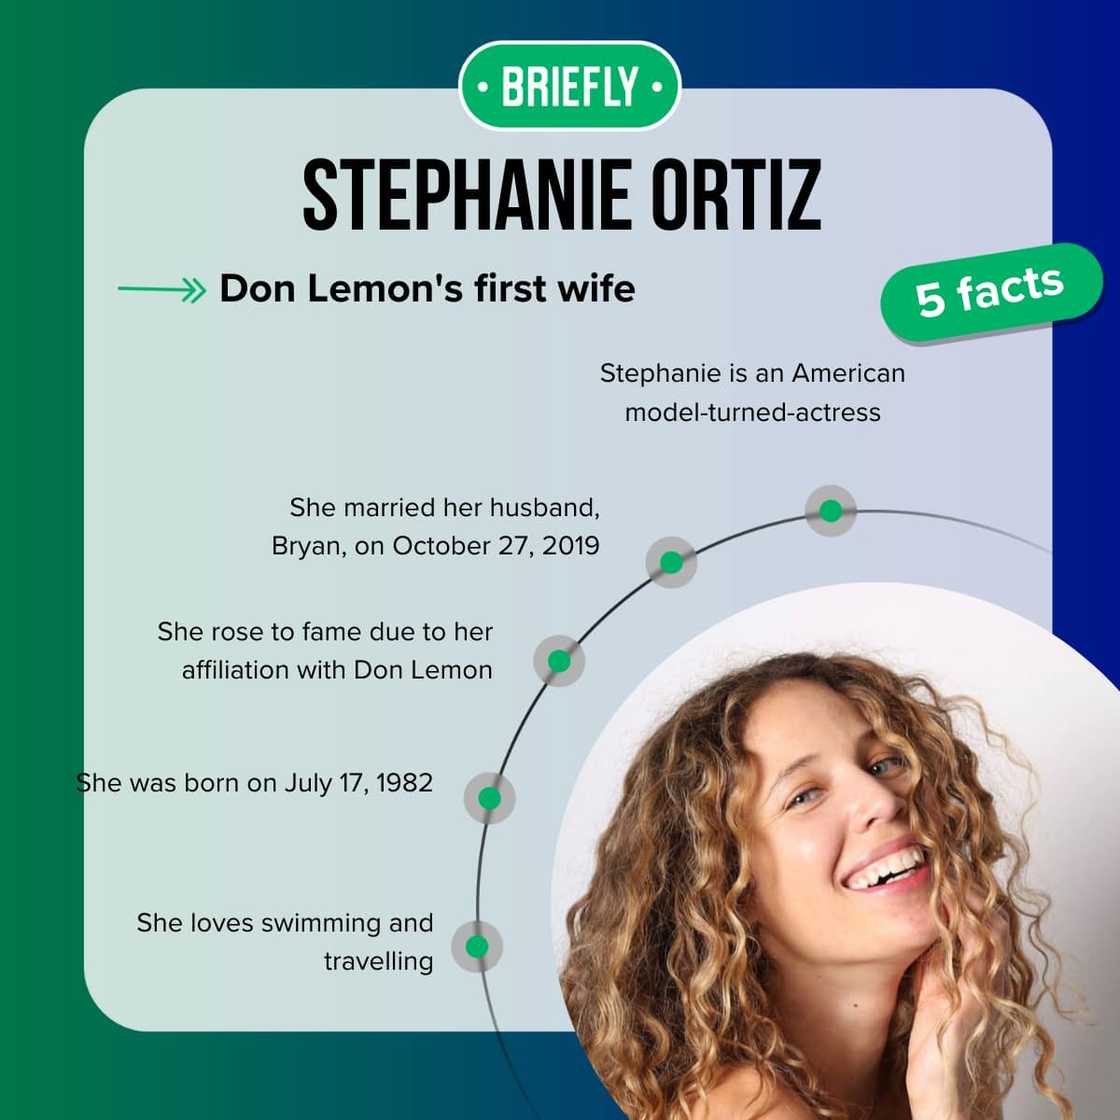 Facts about Stephanie Ortiz